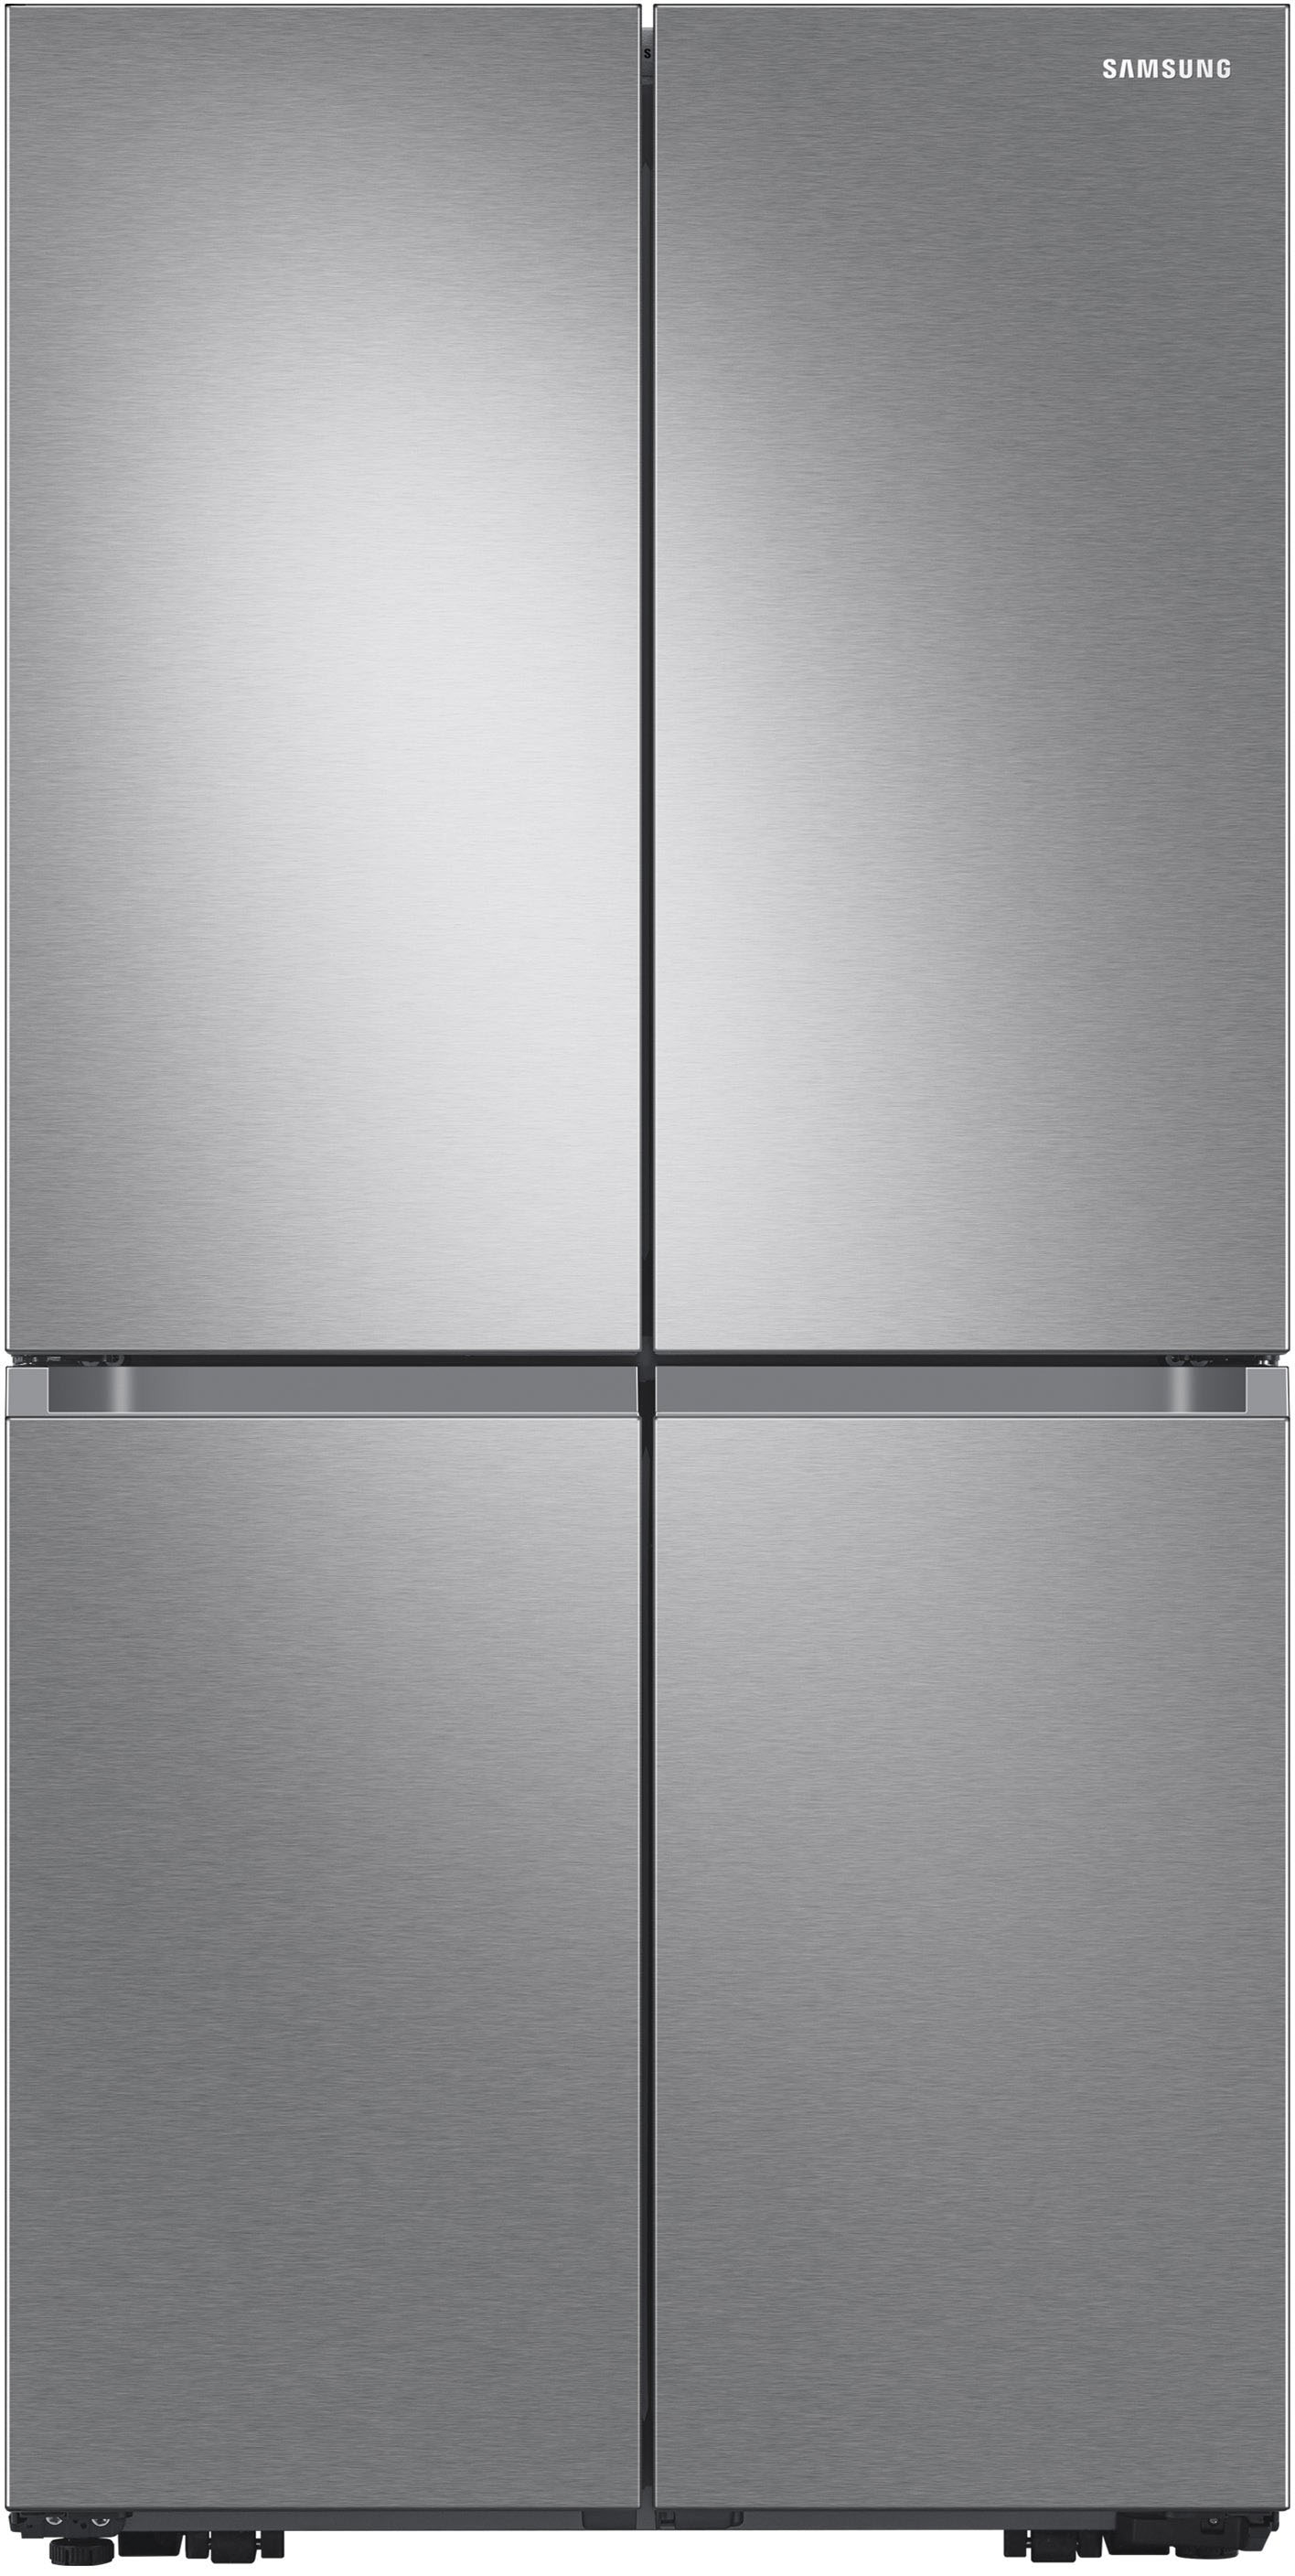 Samsung 29 Cu Ft 4 Door Flex French Door Refrigerator With Wifi Autofill Water Pitcher Dual Ice Maker Stainless Steel Rf29a9071sr Best Buy